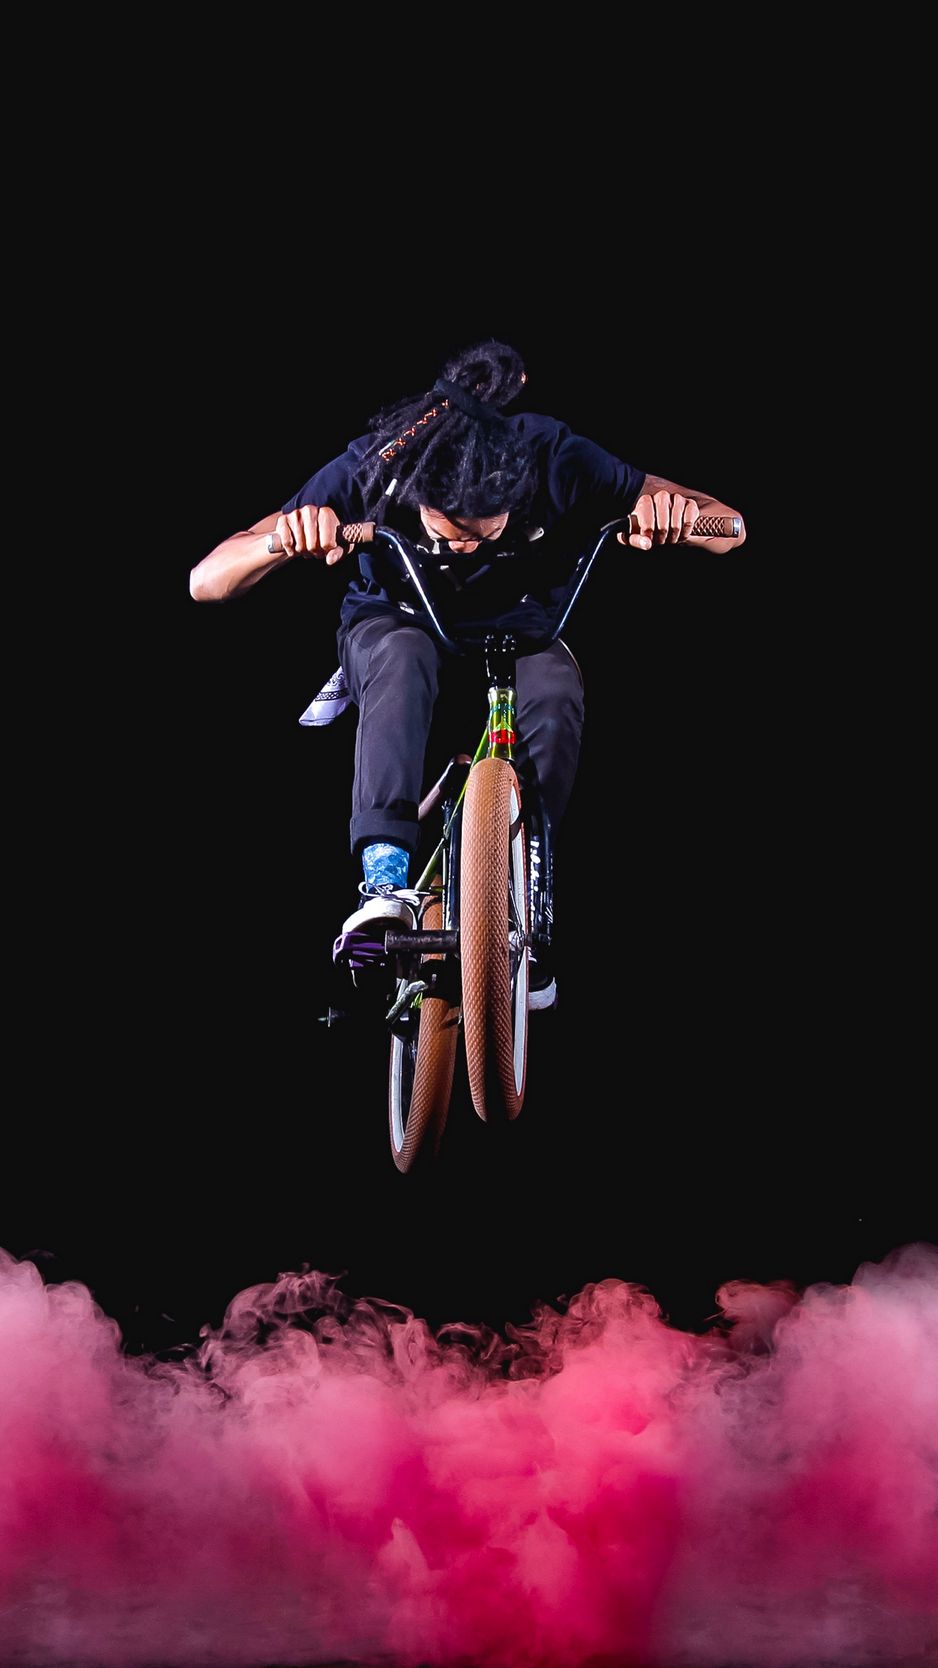 Download wallpaper 938x1668 bmx bike cyclist jump stunt extreme iphone  876s6 for parallax hd background